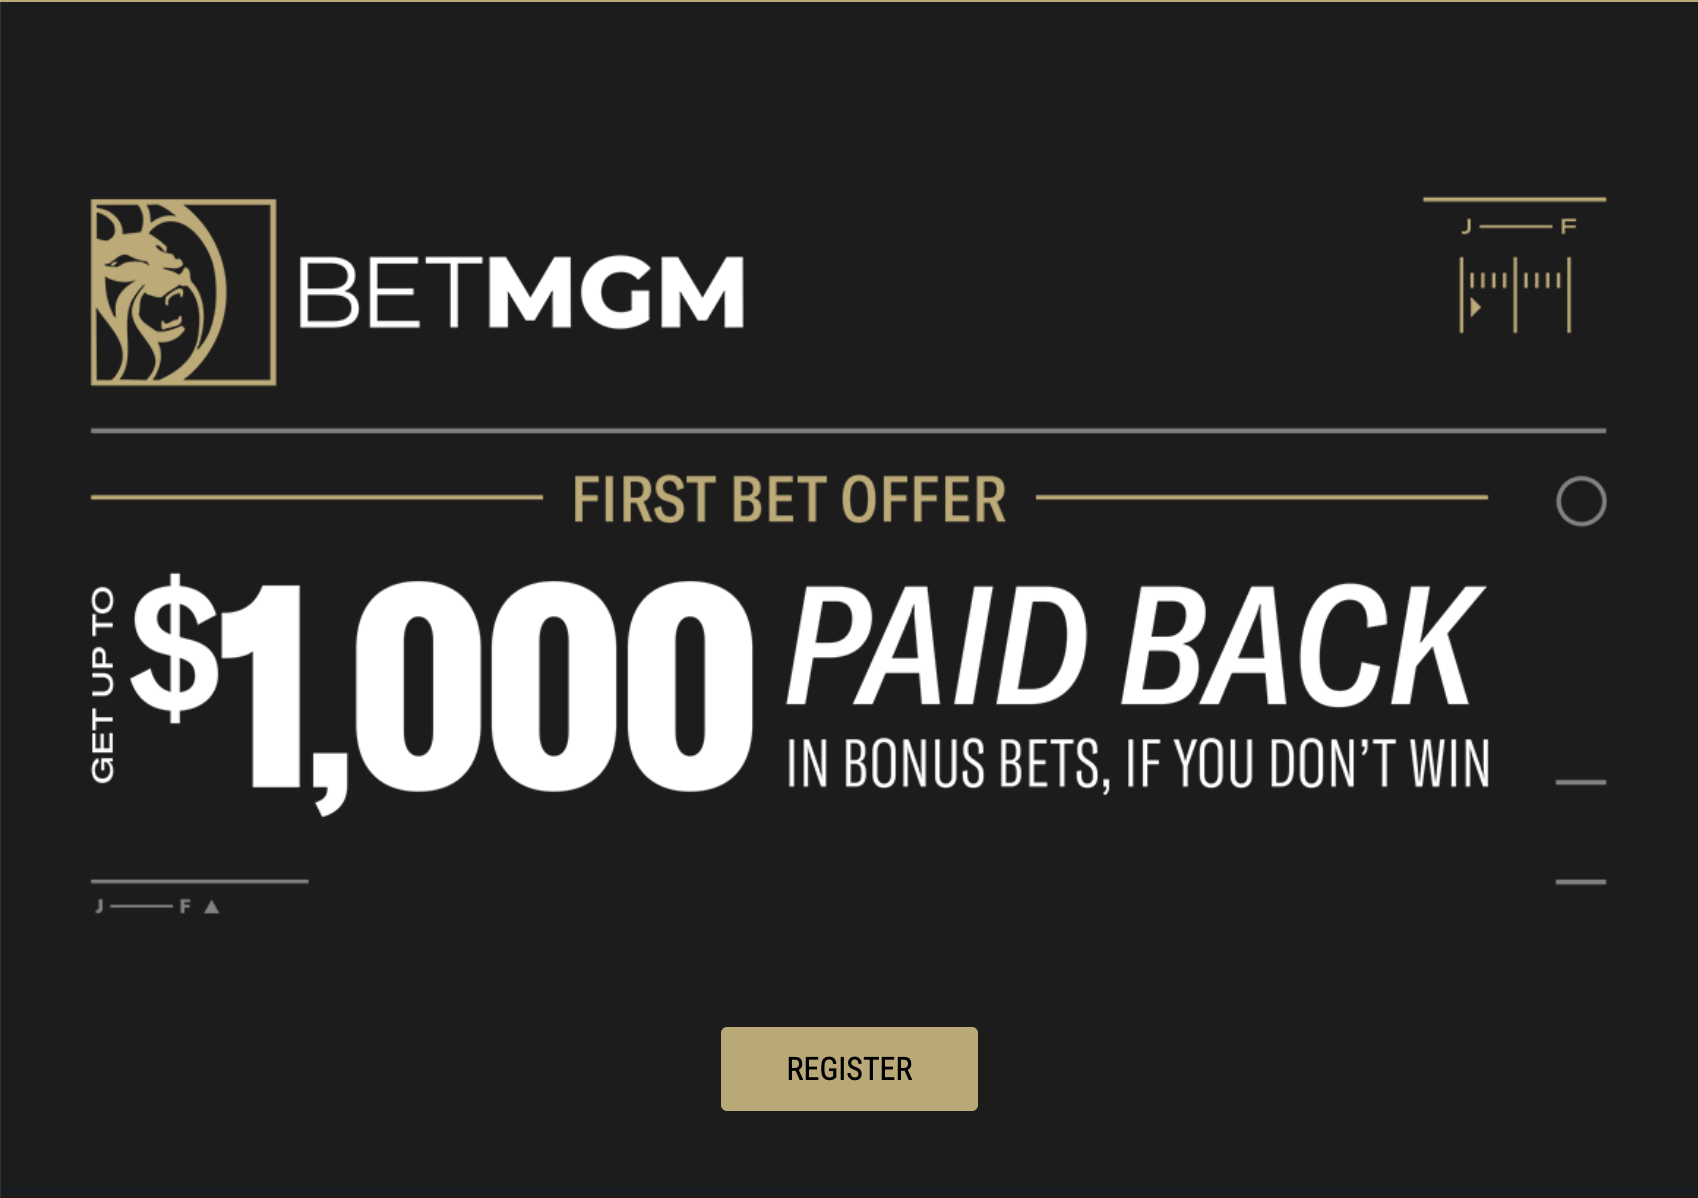 MGM's sign up offer for new users